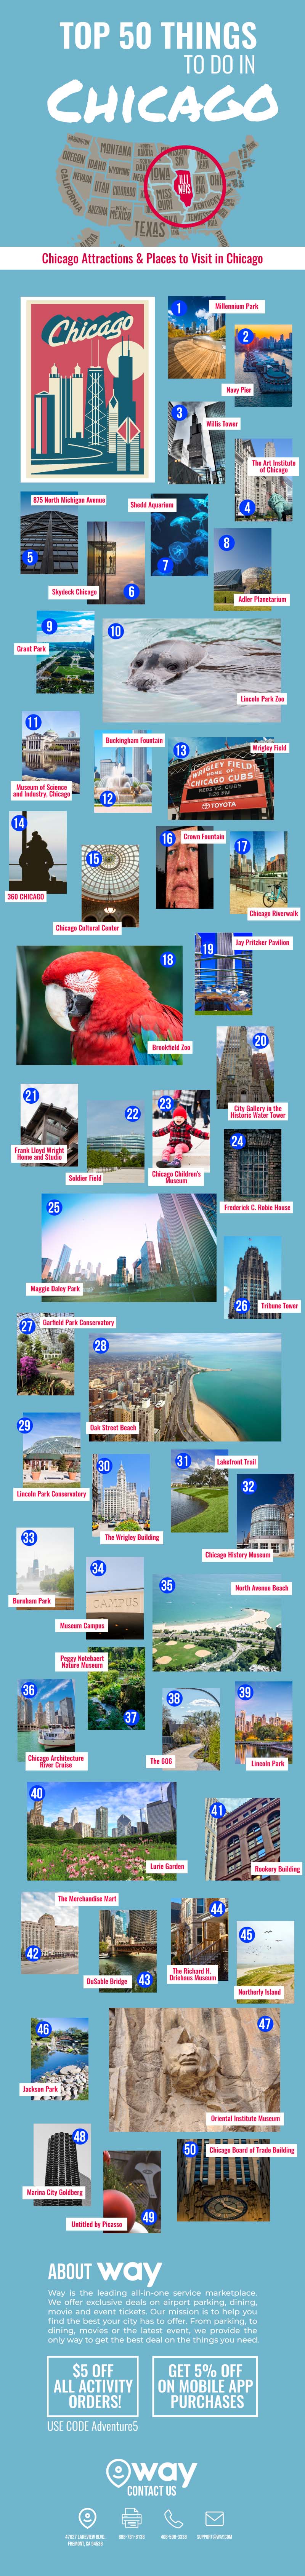 Things to Do in Chicago